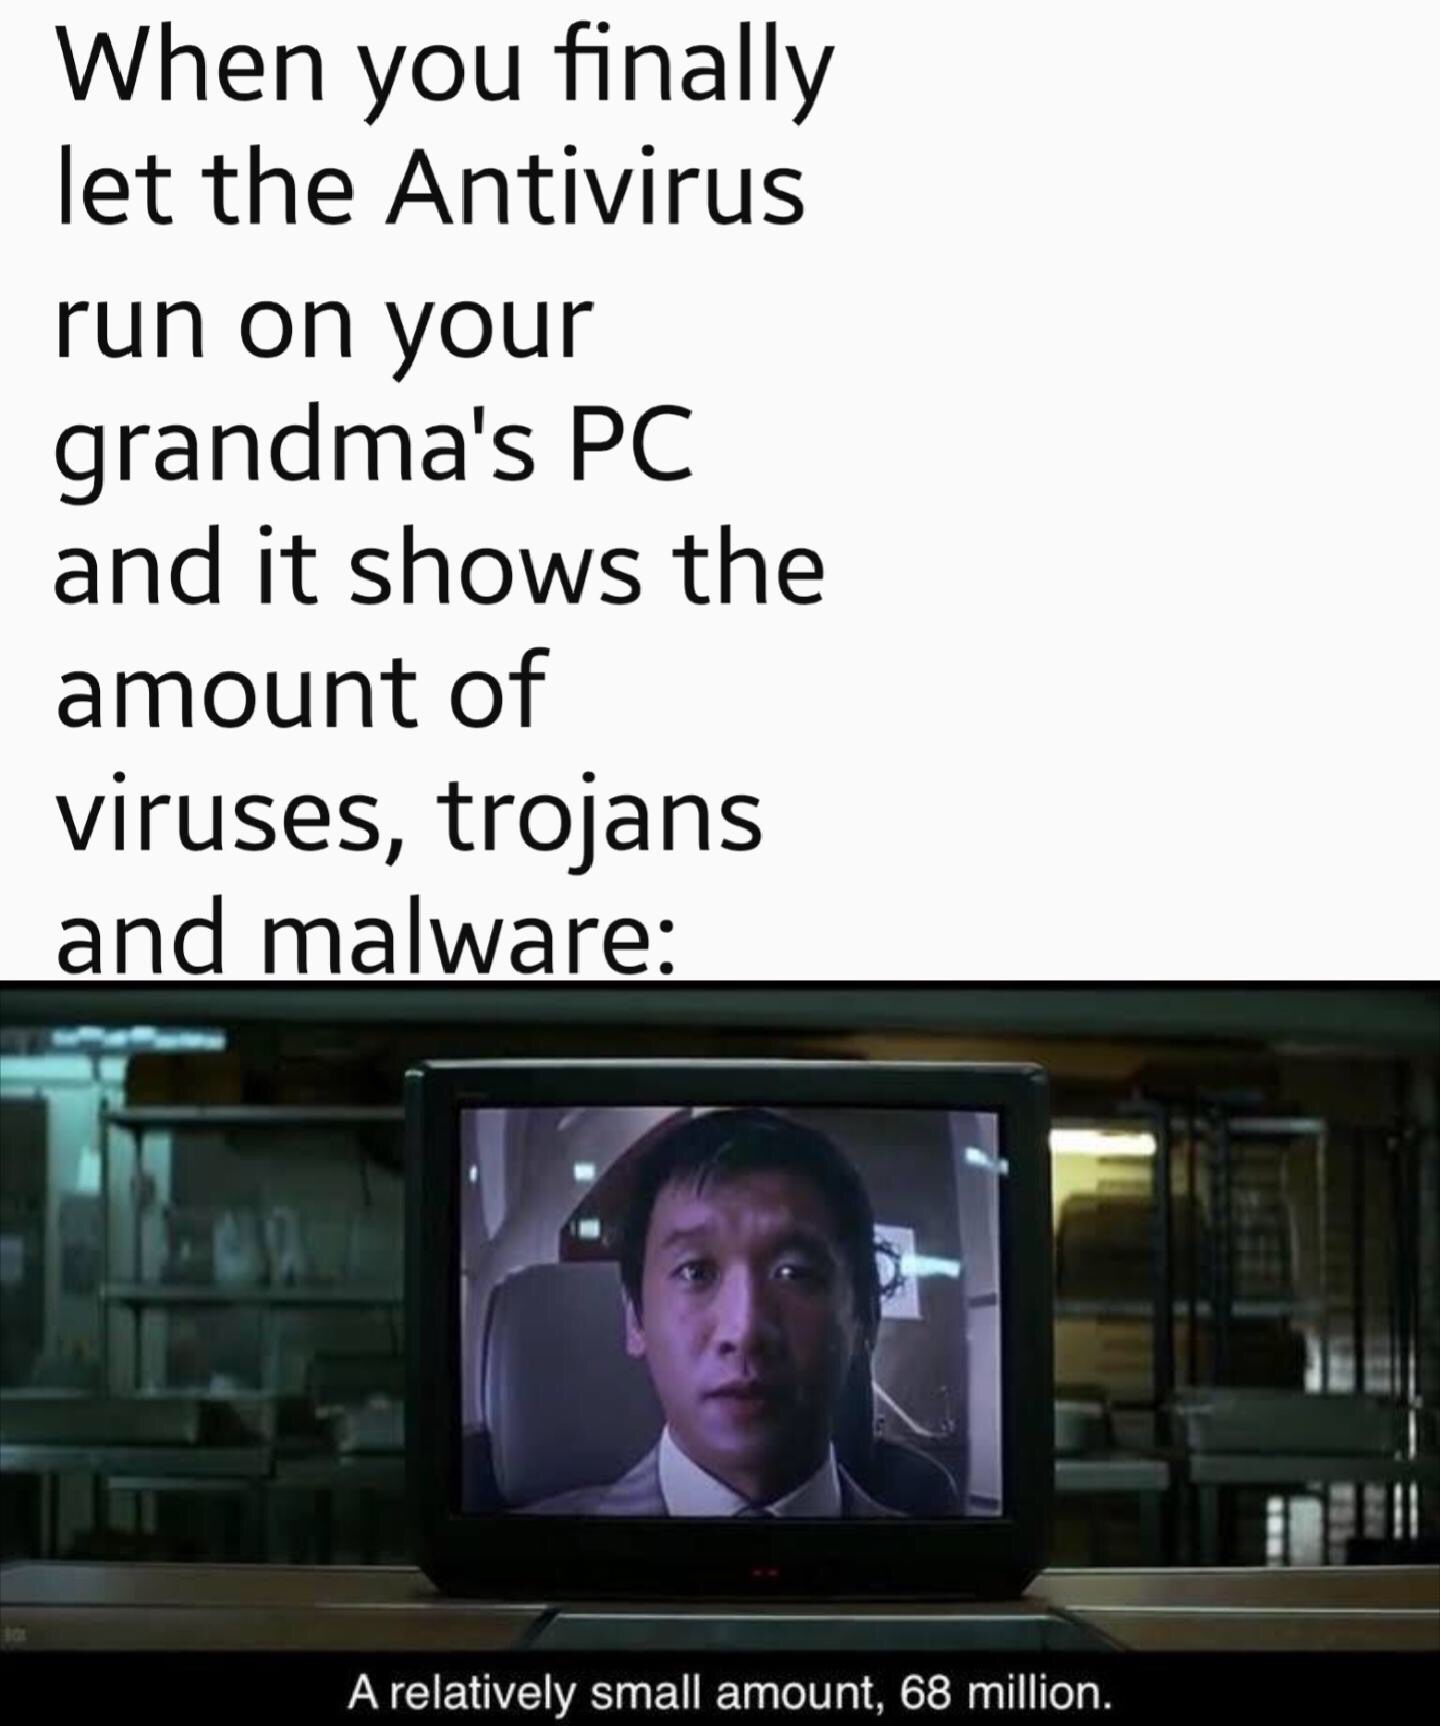 dank memes presentation - When you finally let the Antivirus run on your grandma's Pc and it shows the amount of viruses, trojans and malware A relatively small amount, 68 million.